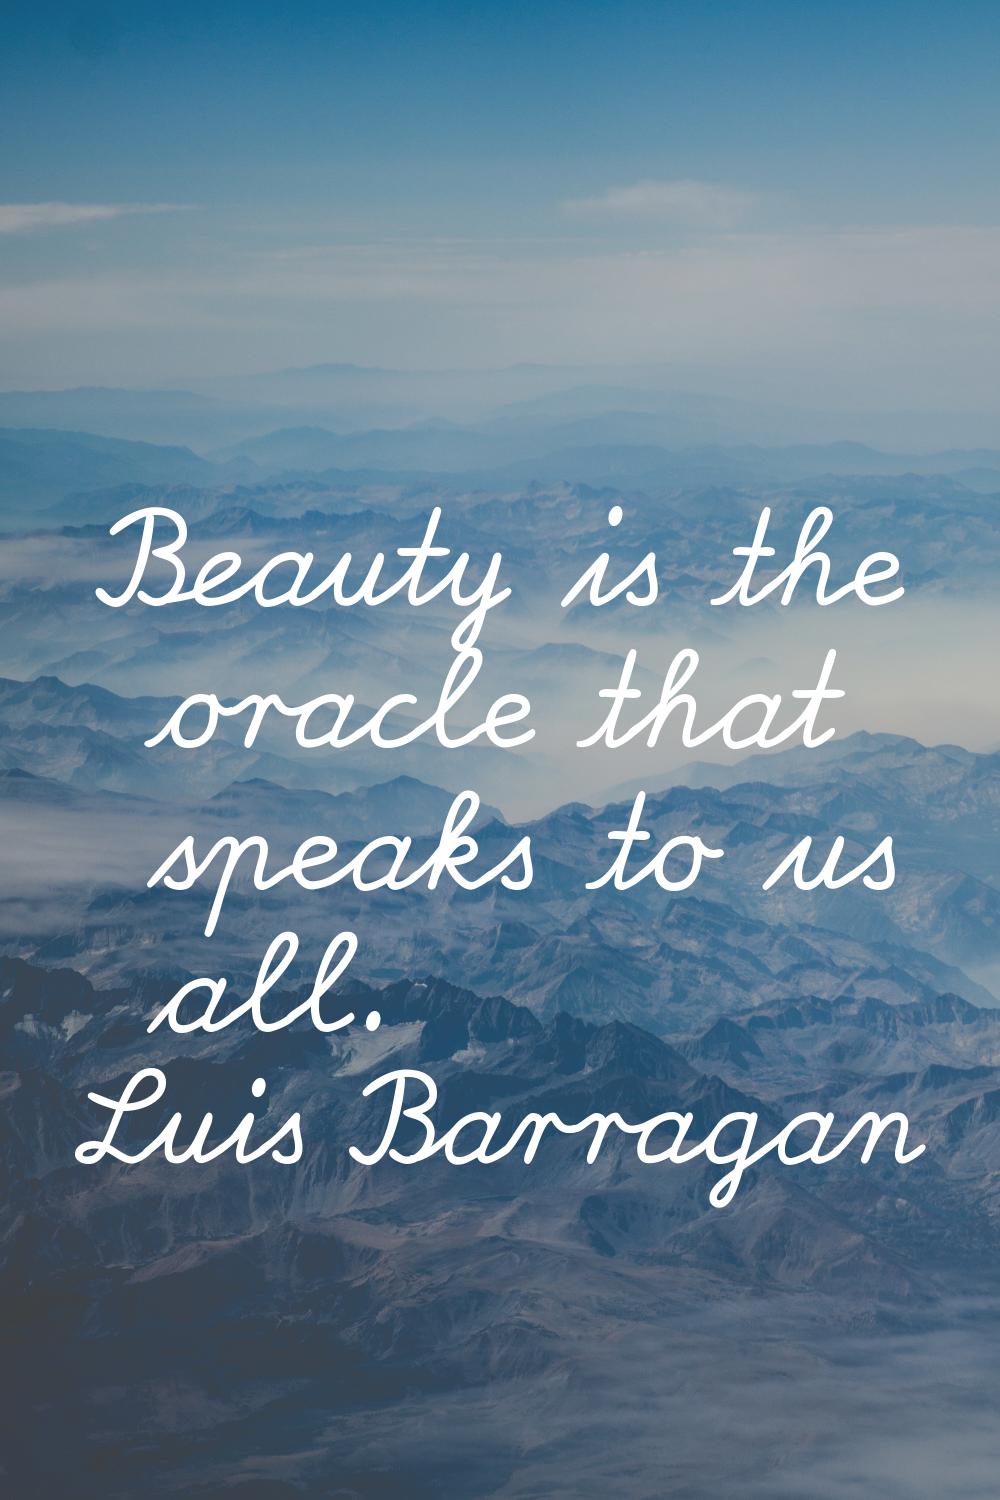 Beauty is the oracle that speaks to us all.